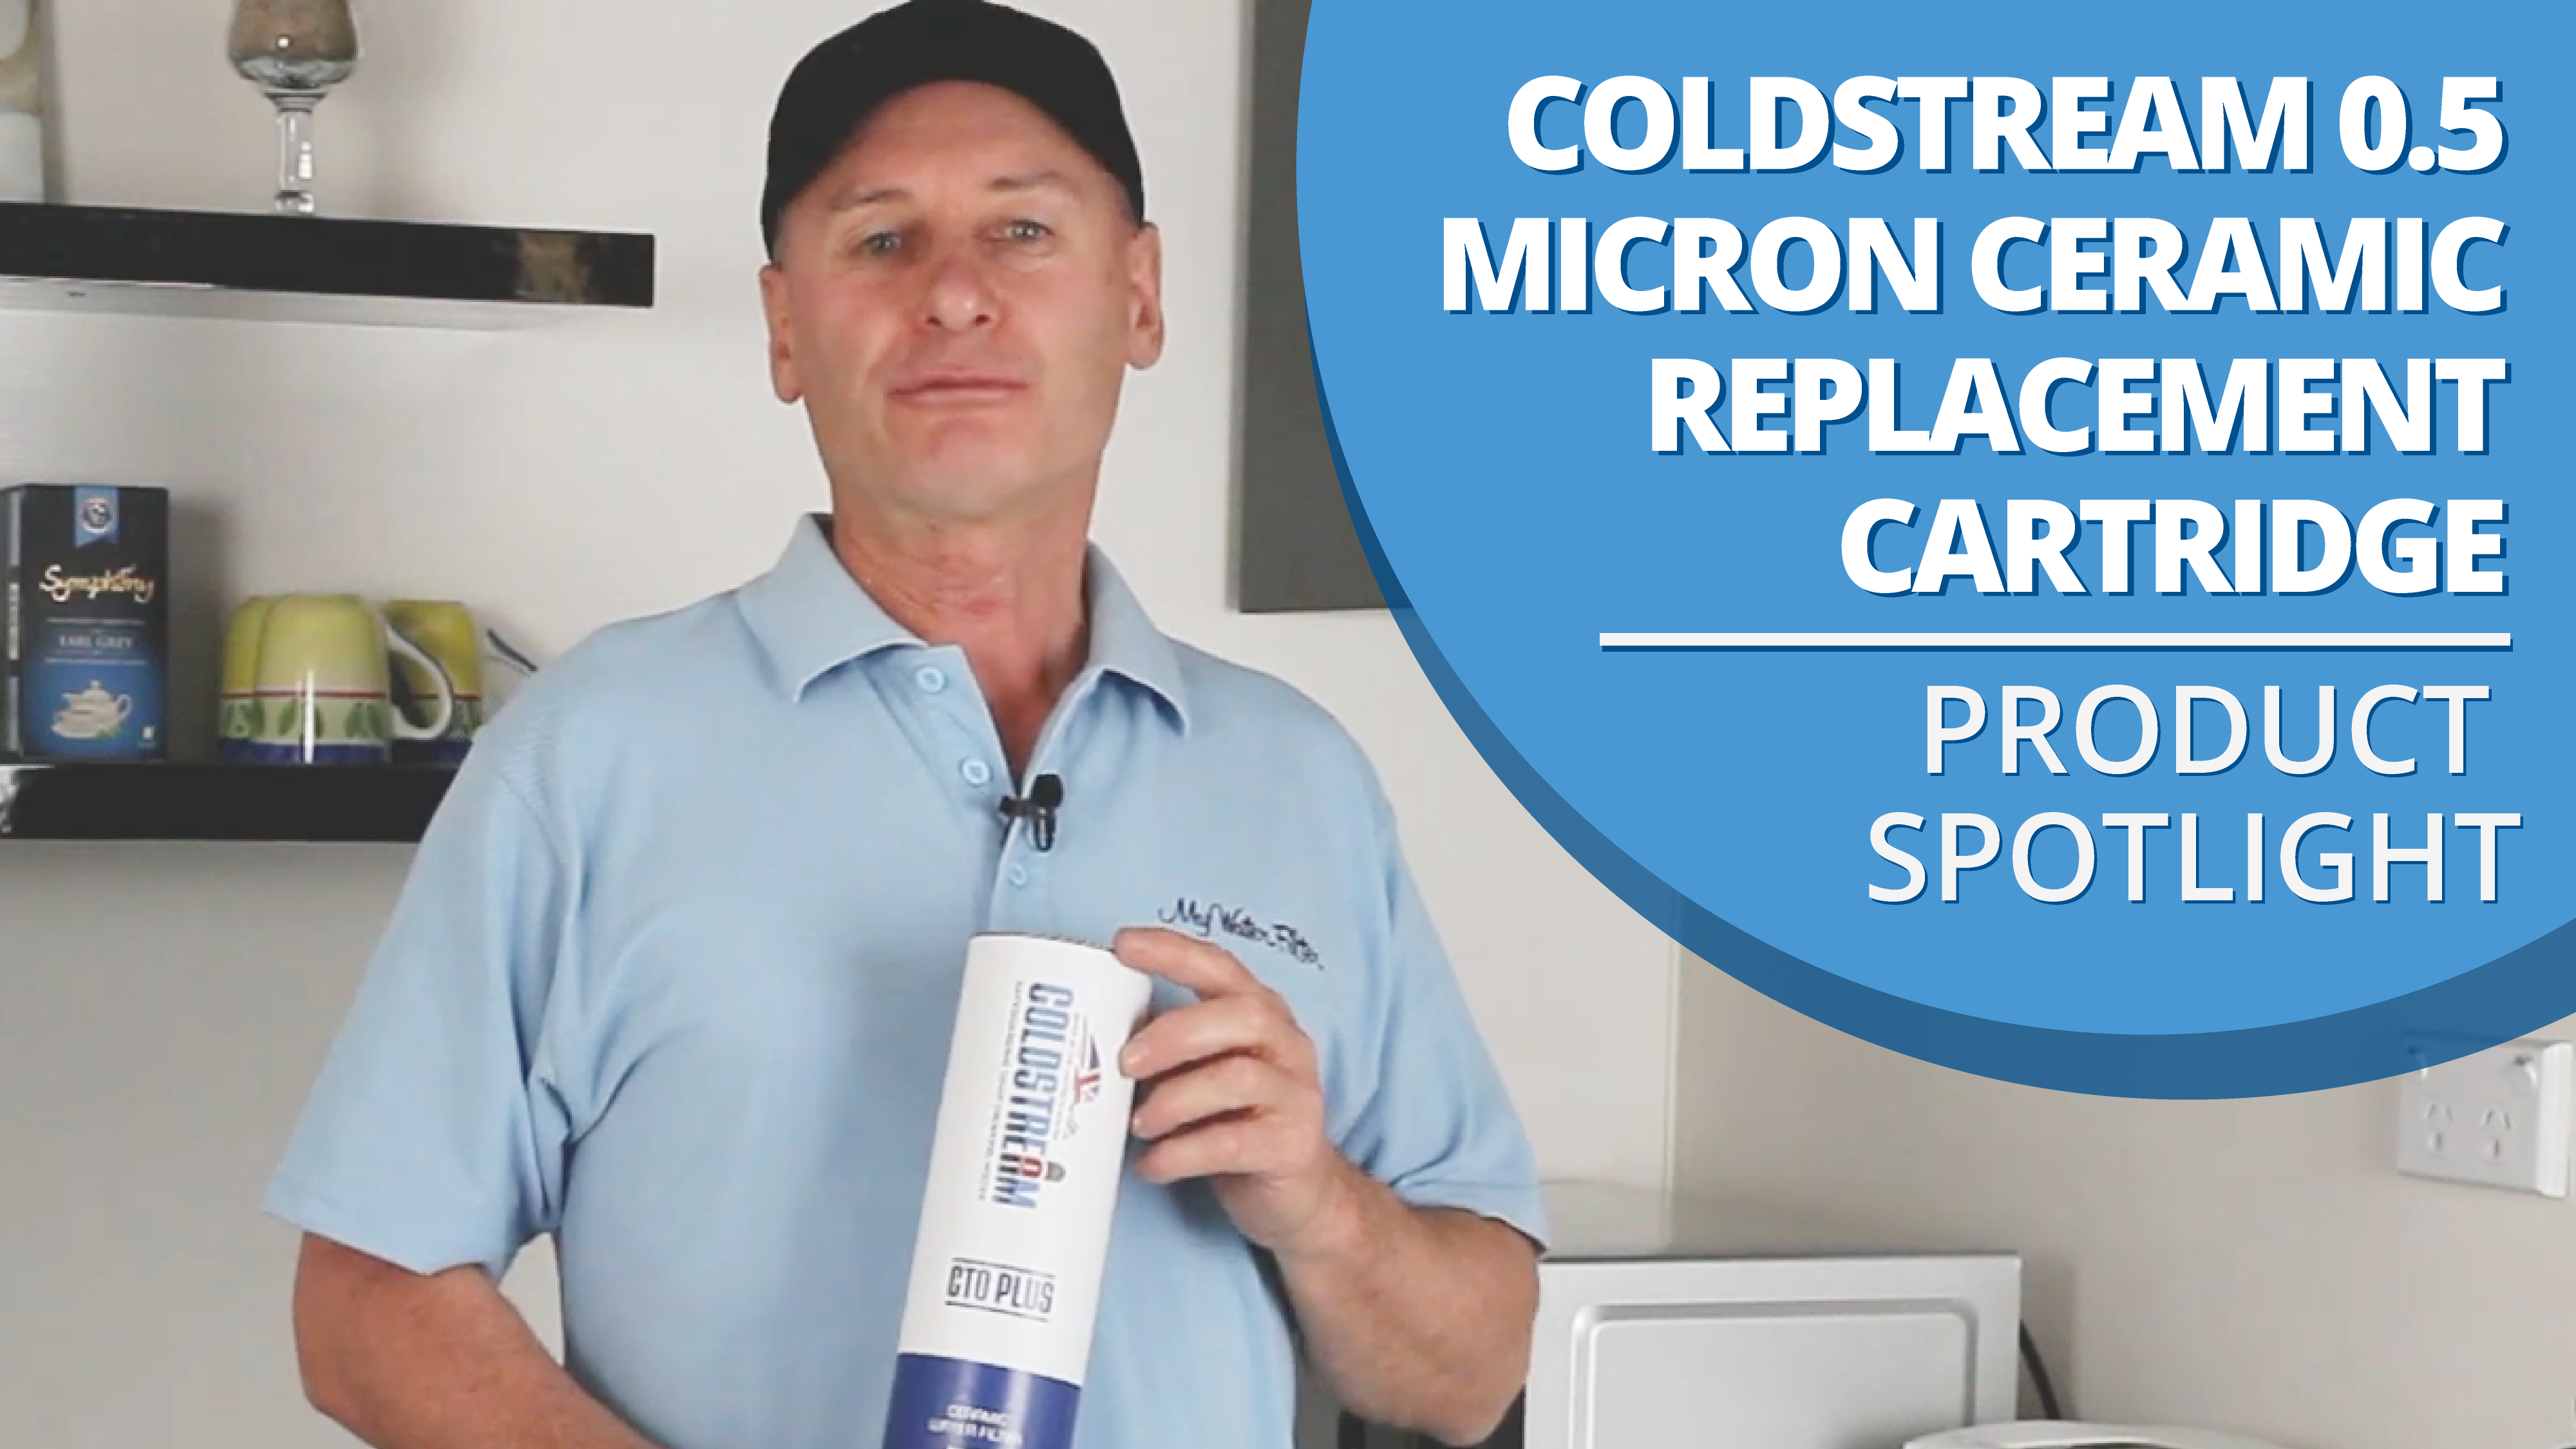 [VIDEO] Coldstream 0.5 Micron Ceramic Water Filter Replacement Cartridge 10" x 2.5" - Product Spotlight